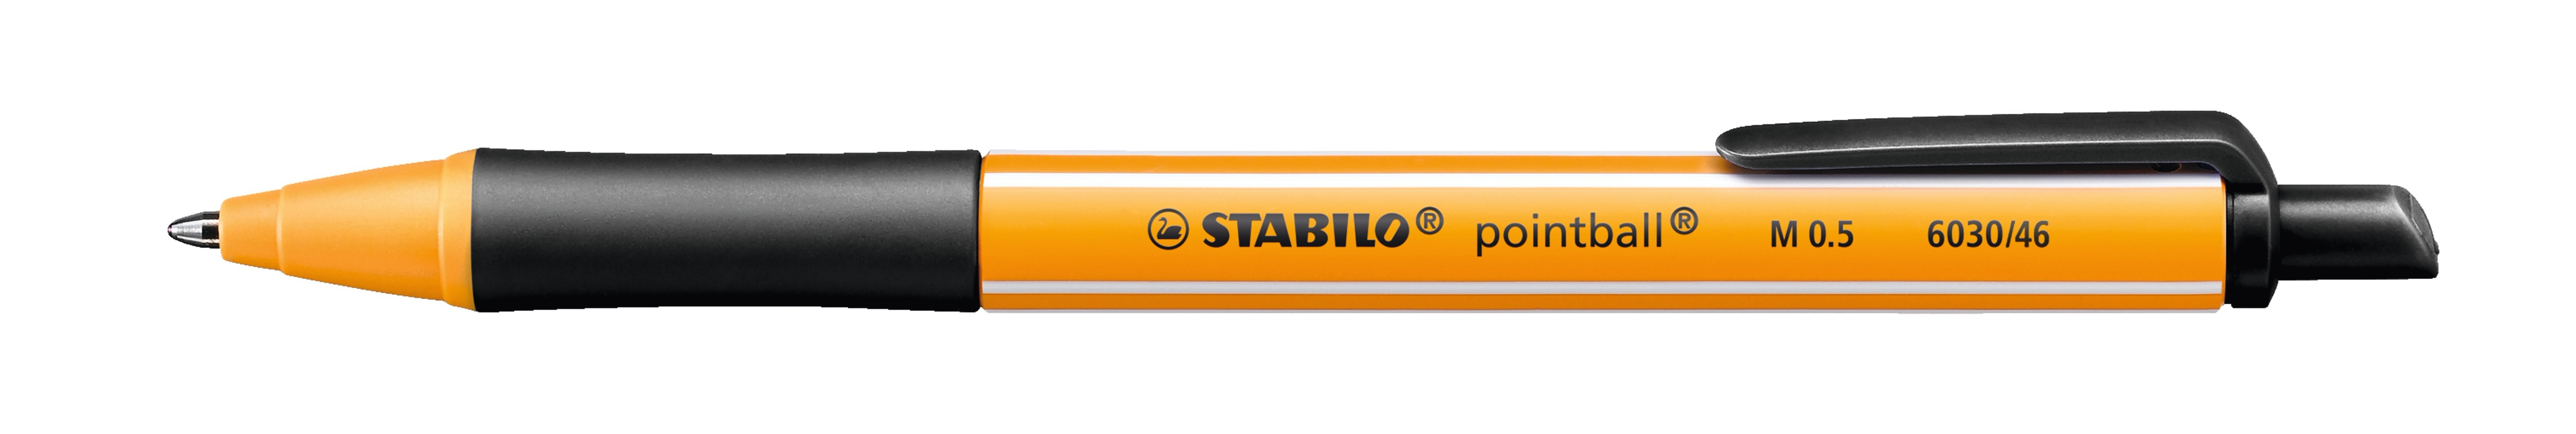 stabilo Stabilo Pointball Co2 Neutral Retractable Ballpoint 0.5mm Line Black (pack 10) 6030/46 6030/46 - AD01